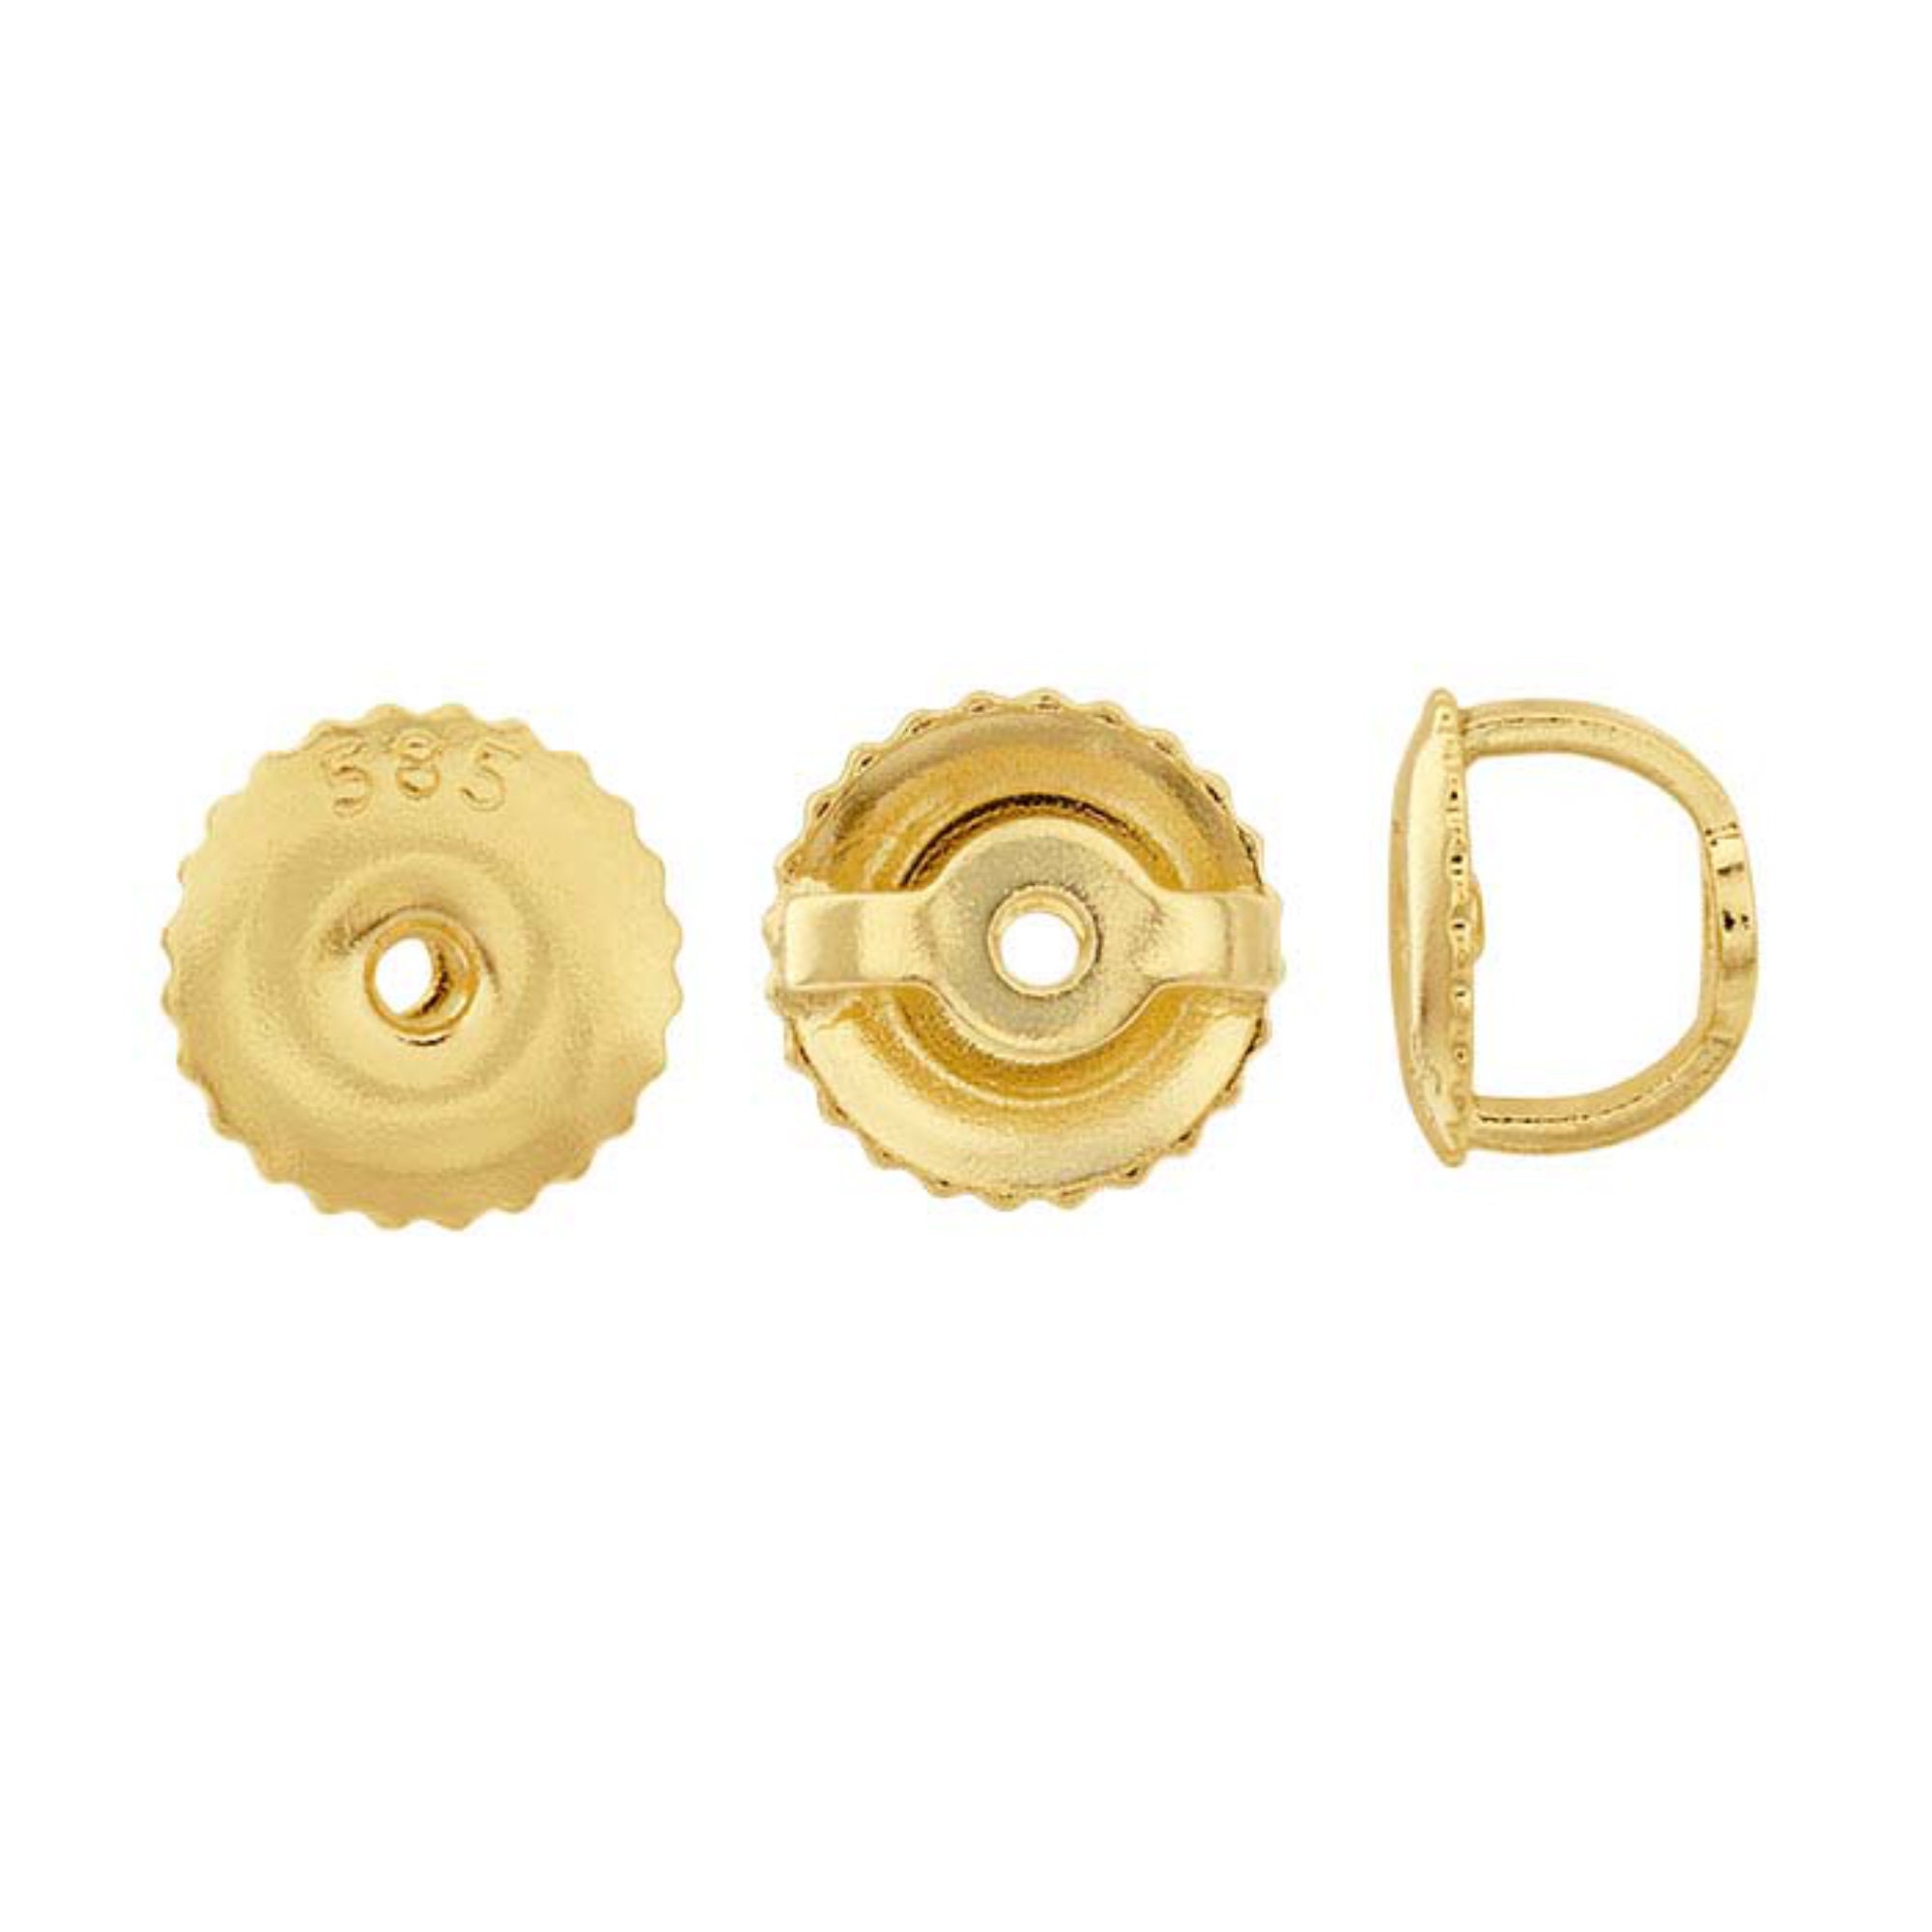 14K Solid Yellow Gold Threaded Earring Backs Nuts for 0.032screw Posts  7.5mm 2pcs 